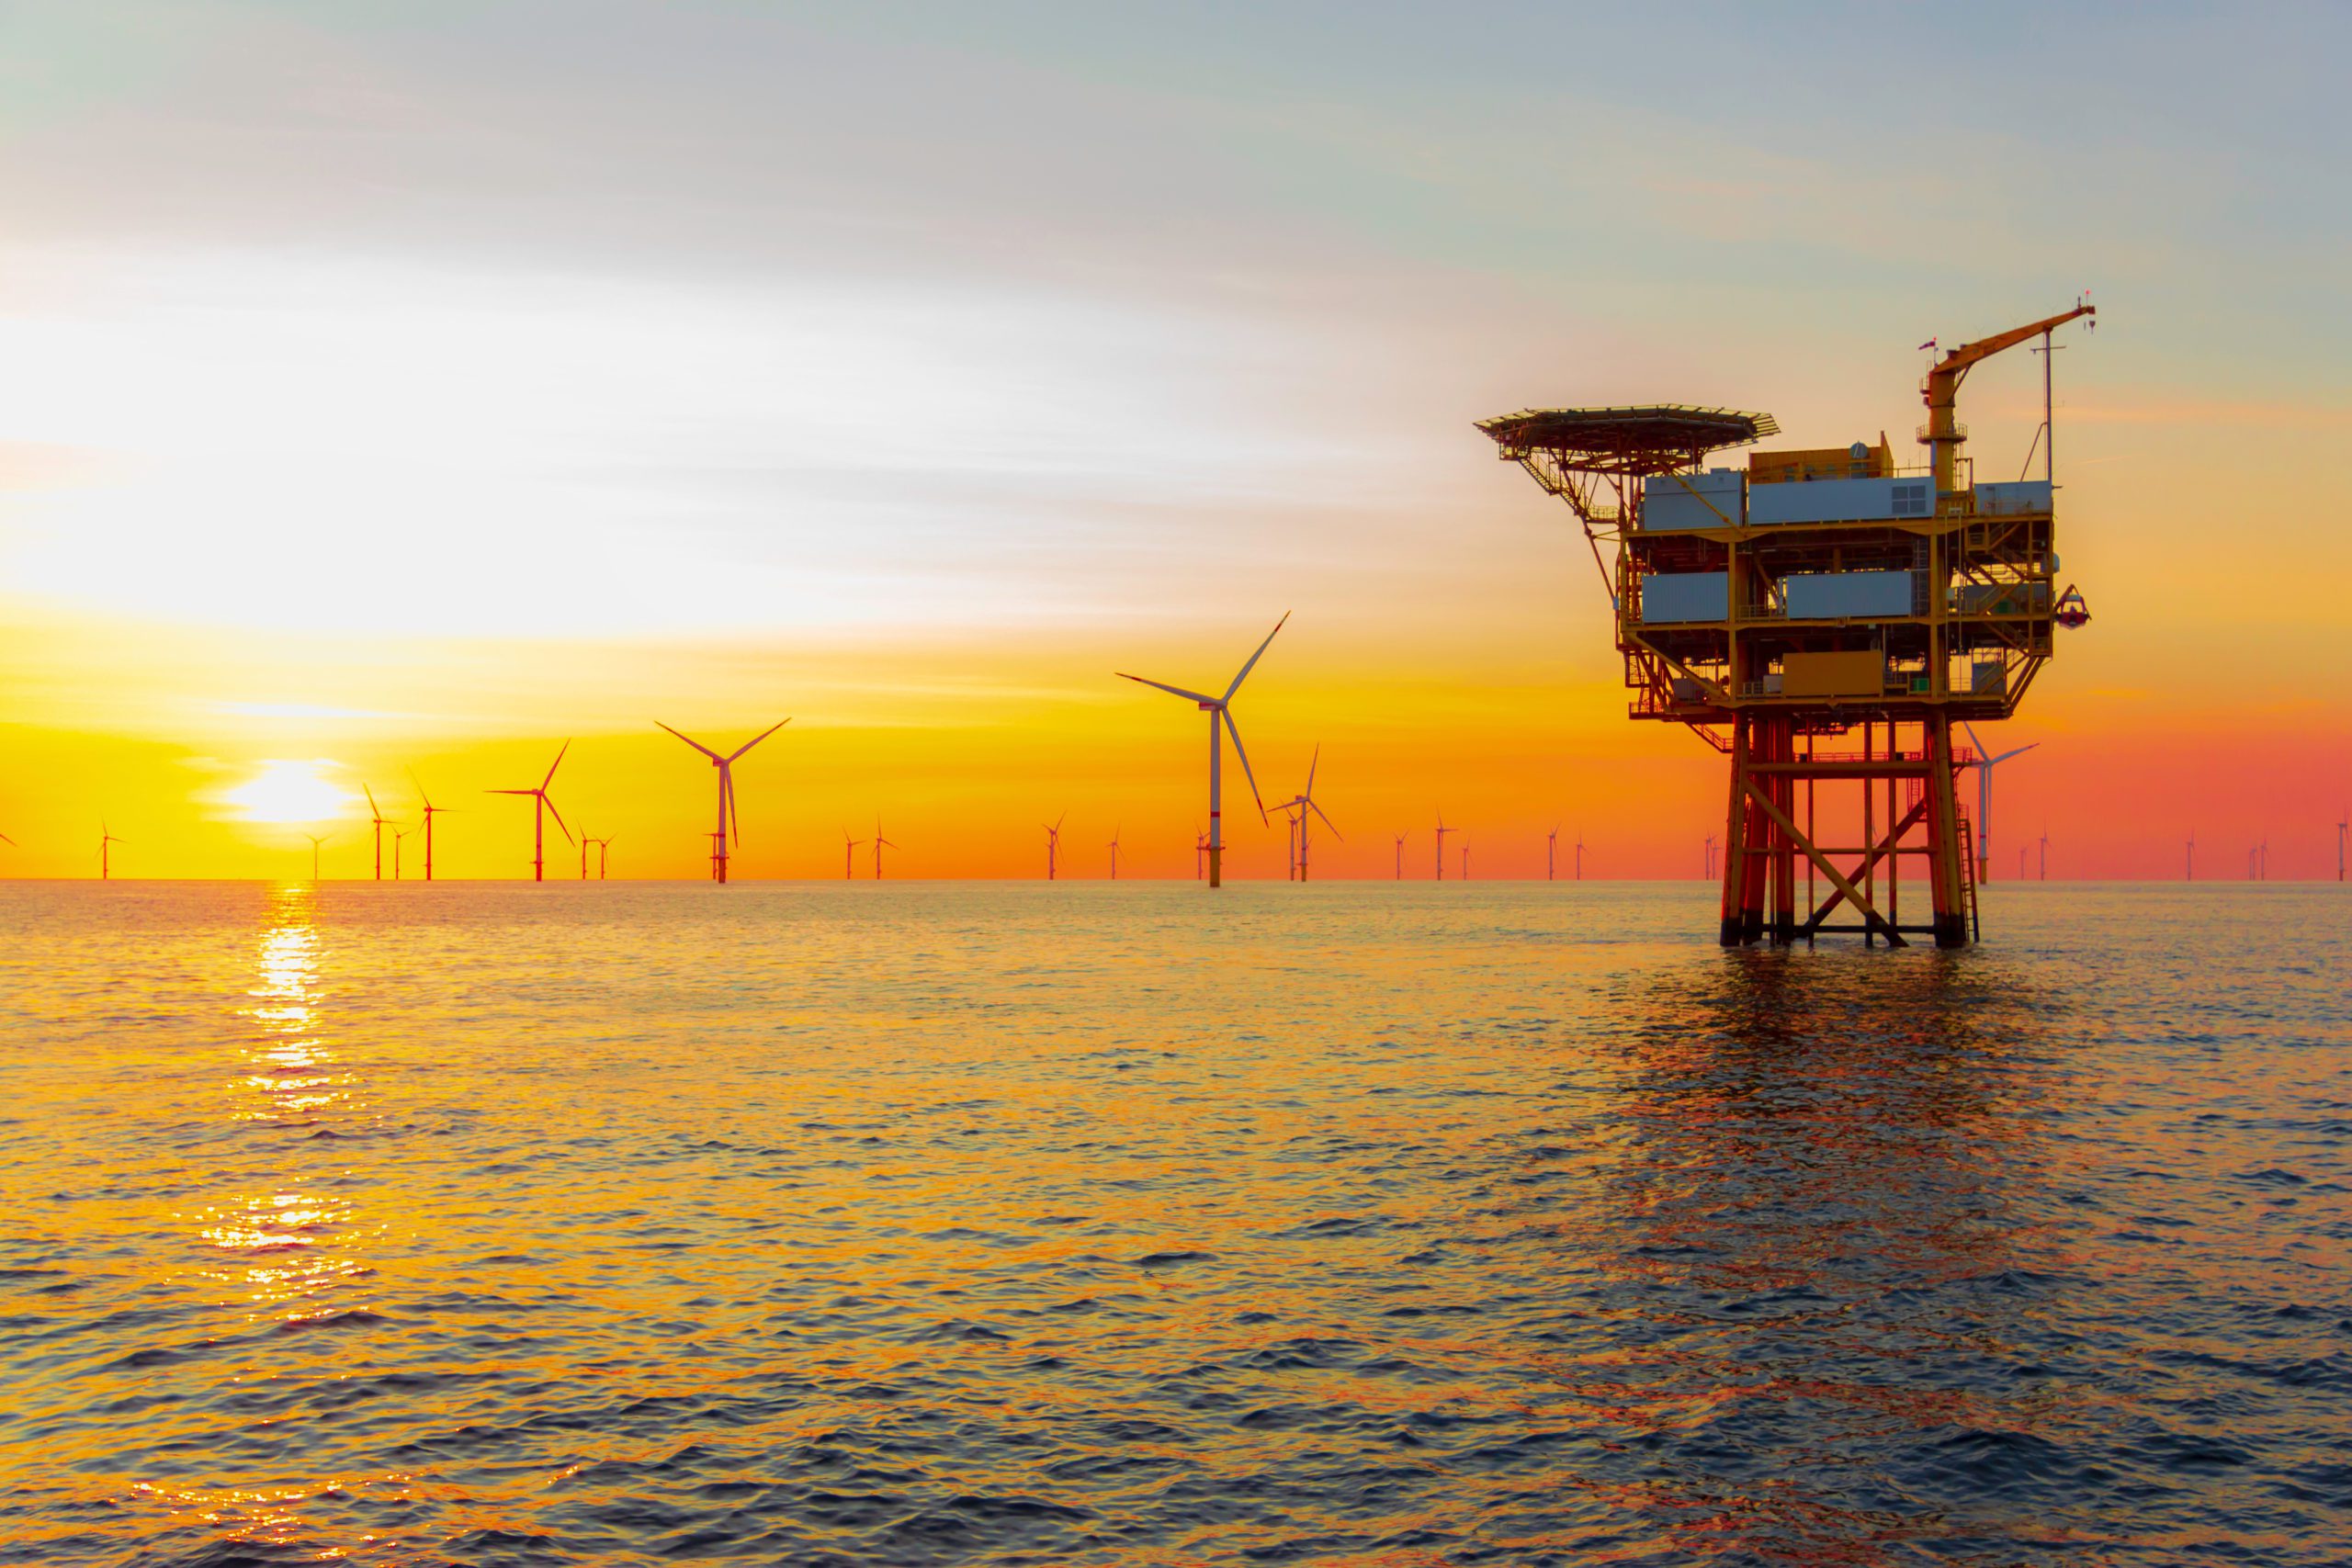 New York Seeking Proposals for Potential Offshore Wind Innovation and R&D Projects